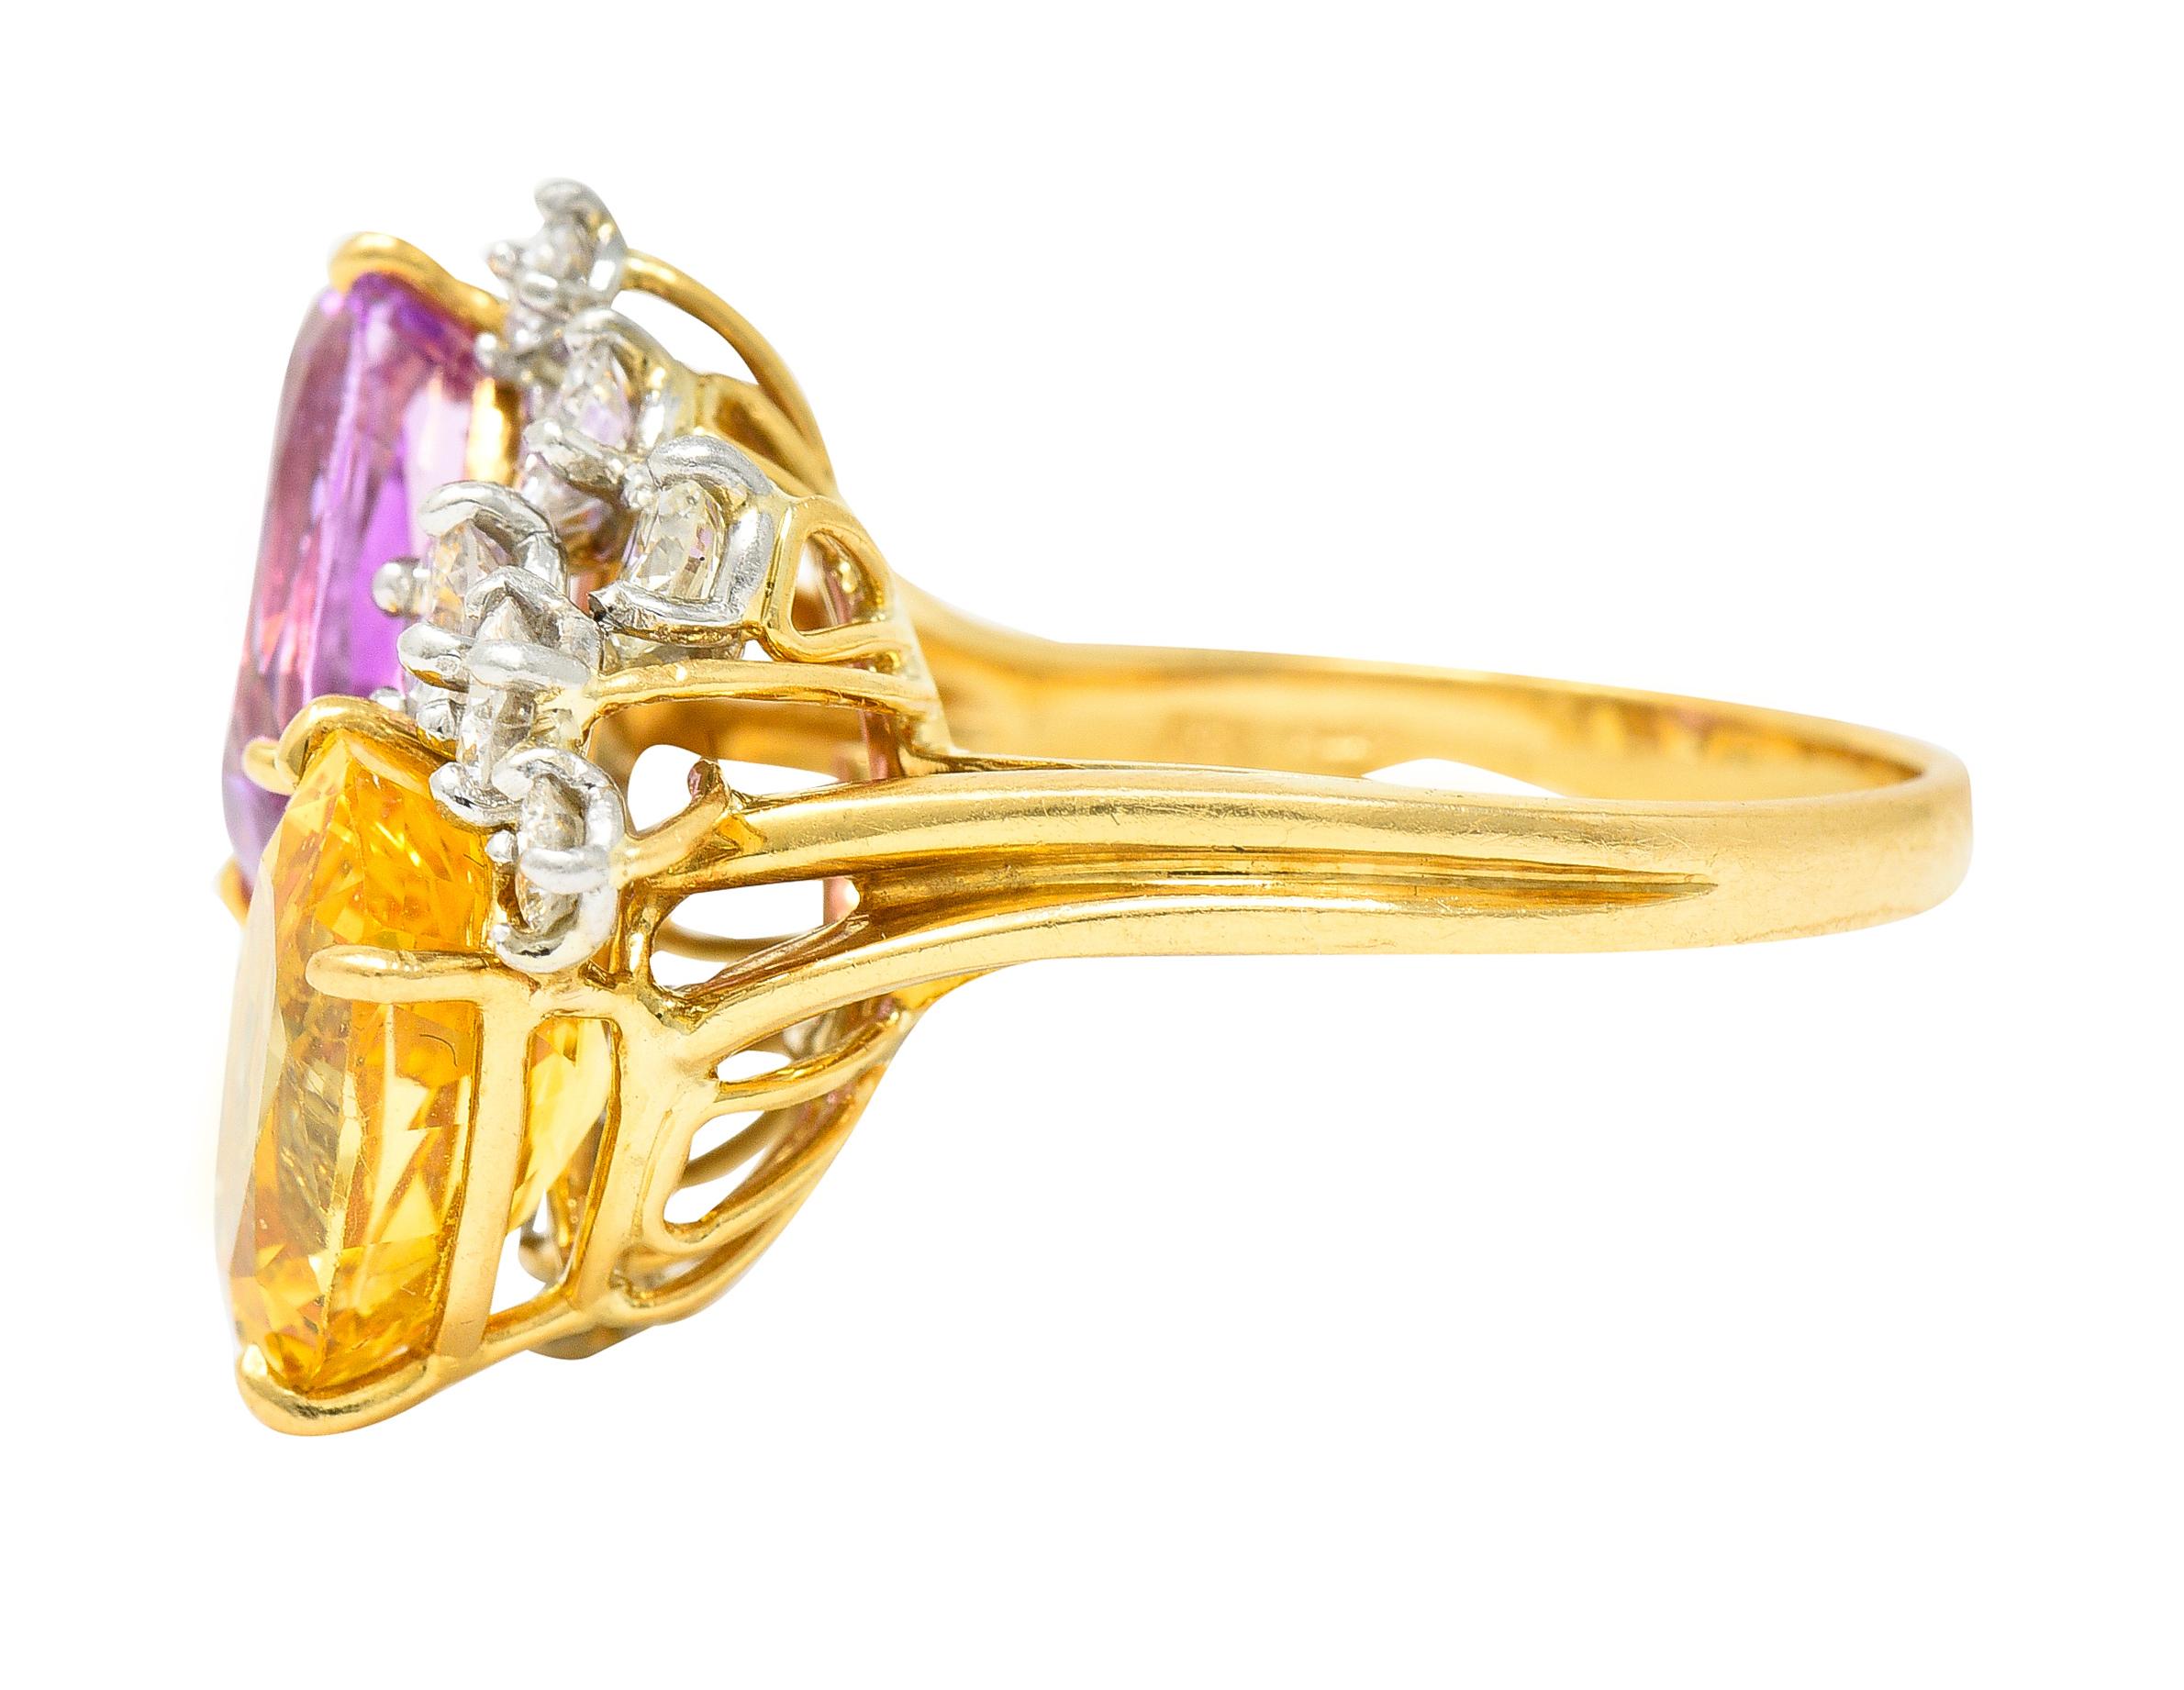 Oscar Heyman 11.12 Carats Pink & Yellow Sapphire Diamond Platinum 18K Gold Ring In Excellent Condition For Sale In Philadelphia, PA